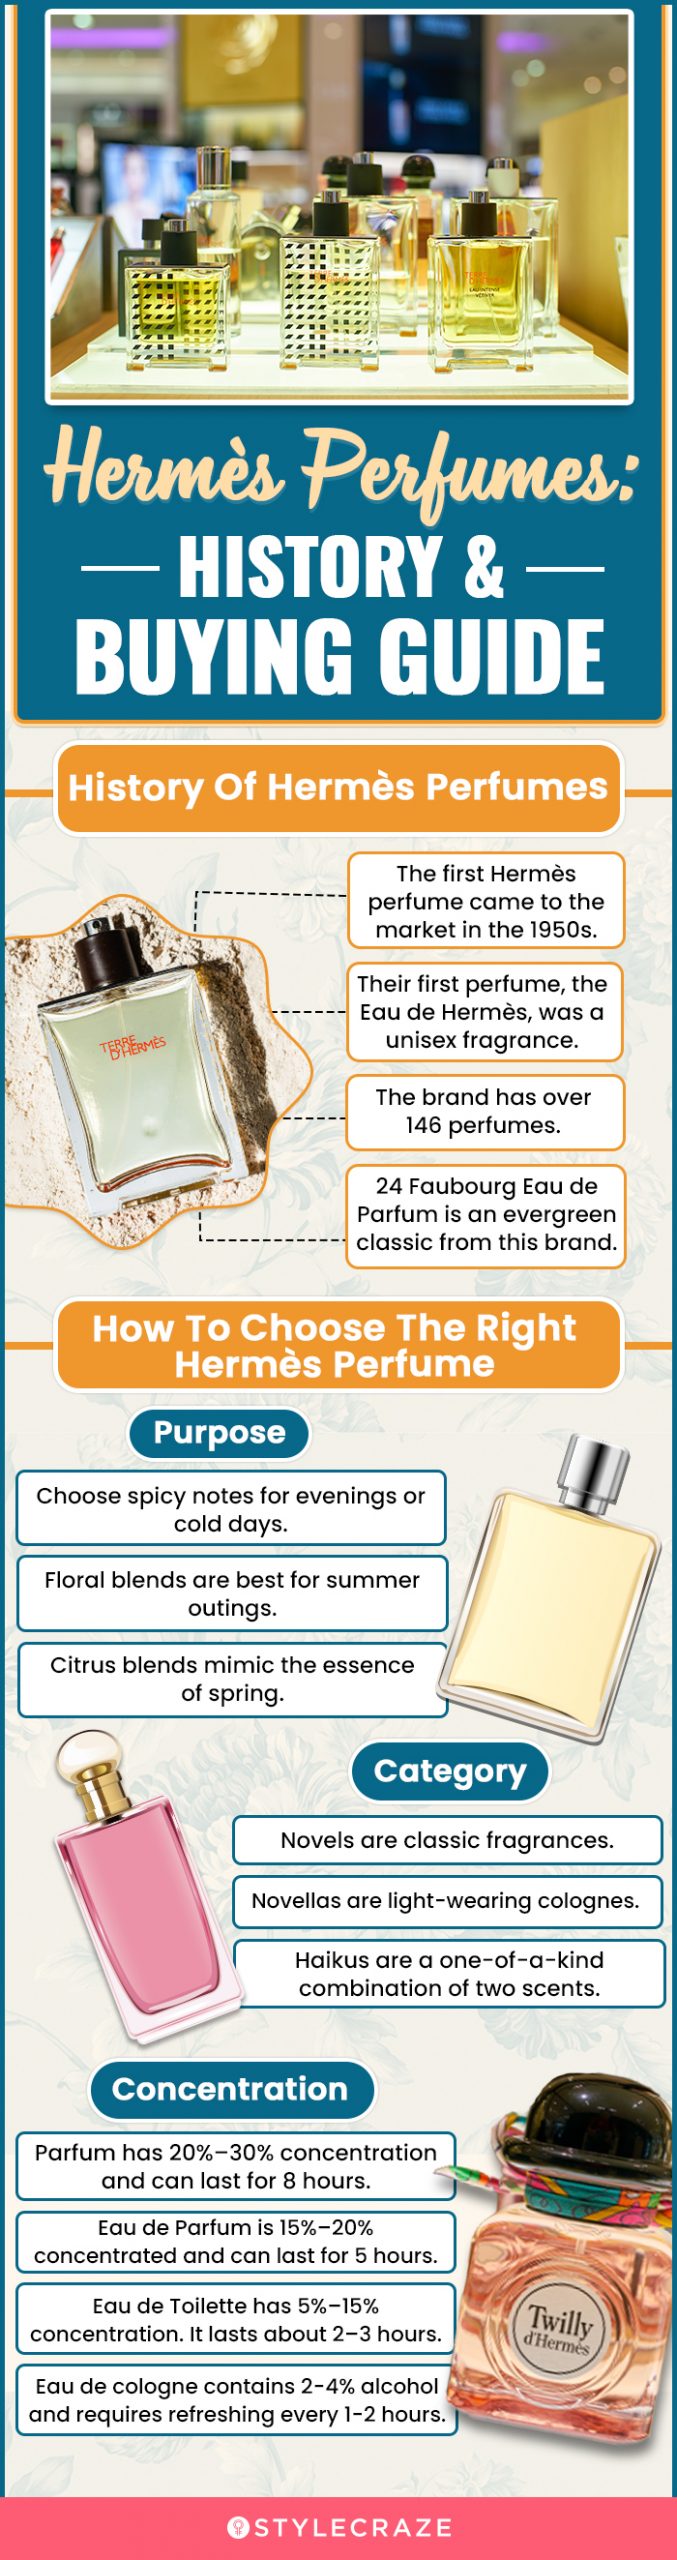 Hermès Perfumes: History & Buying Guide (infographic)